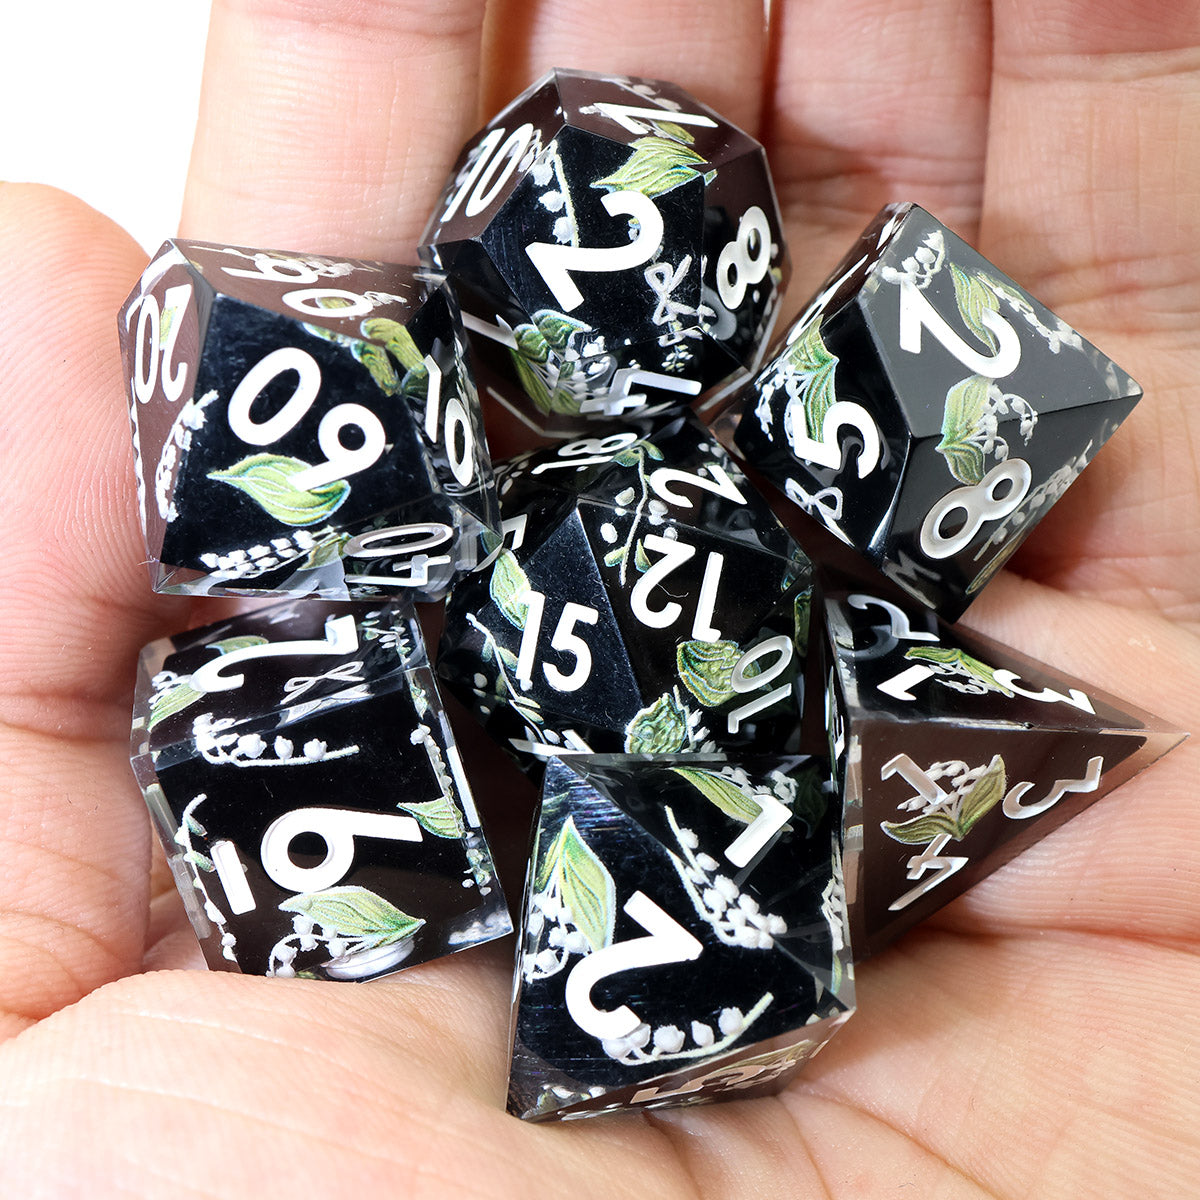 Sharp edge sticker dice for dungeons and dragons, DND, TTRPG role playing games and dice goblin, critical critters 